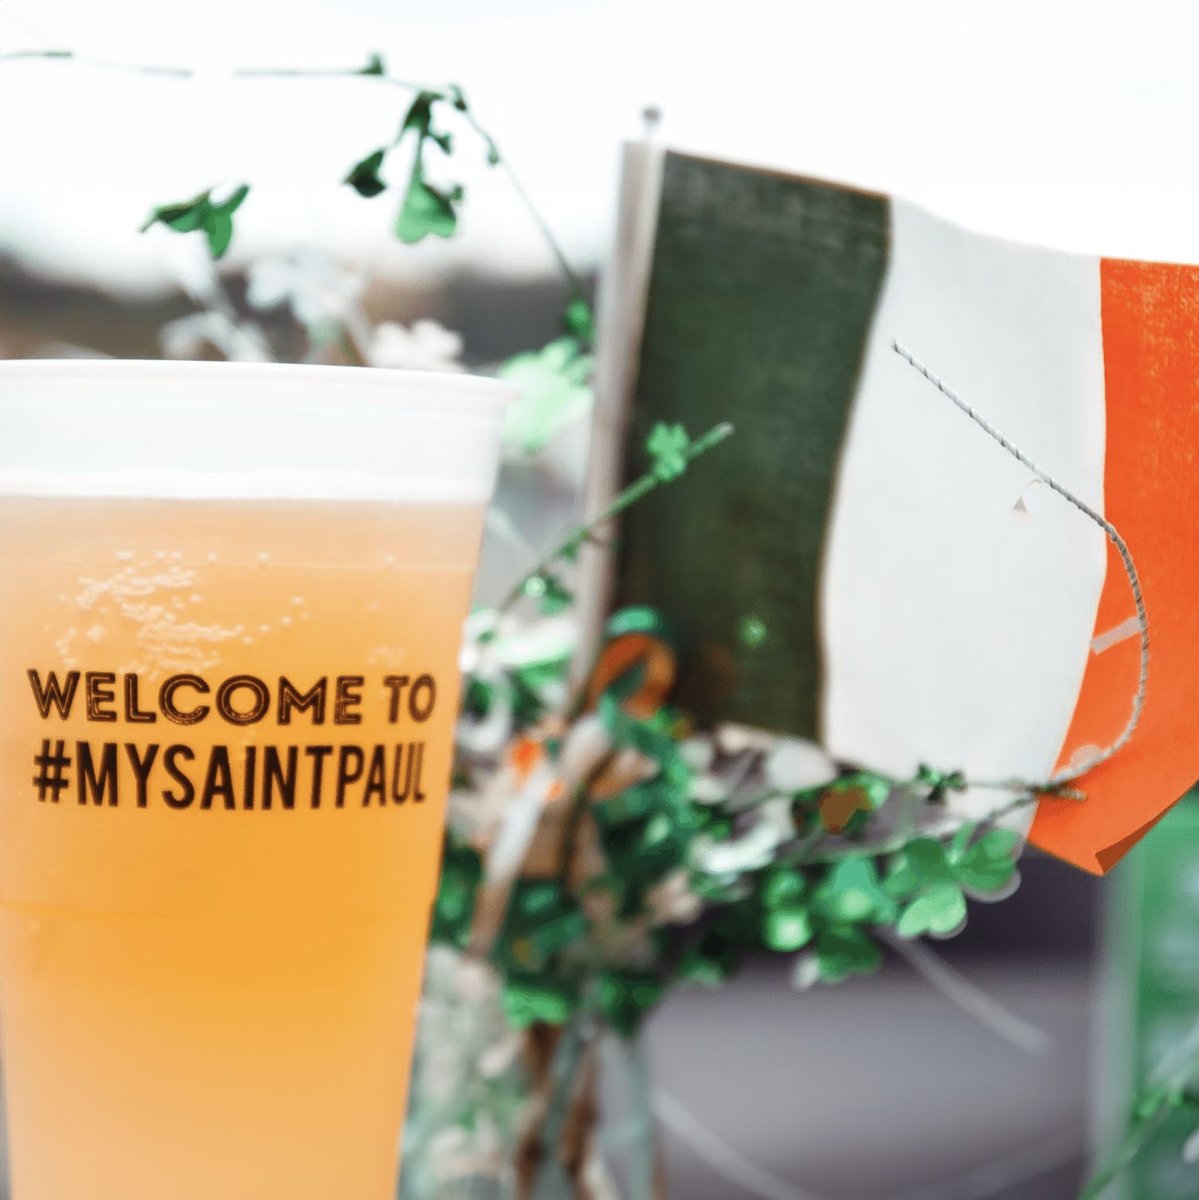 Whether you’re looking for traditional Irish food, pub grub or the perfect pint—find it at one of Saint Paul’s Irish-themed bars and restaurants. 🍀 Explore the full list > bit.ly/3wAJHmt #MySaintPaul #VisitSaintPaul #StPatricksDay #DineSaintPaul #IrishPubsSaintPaul